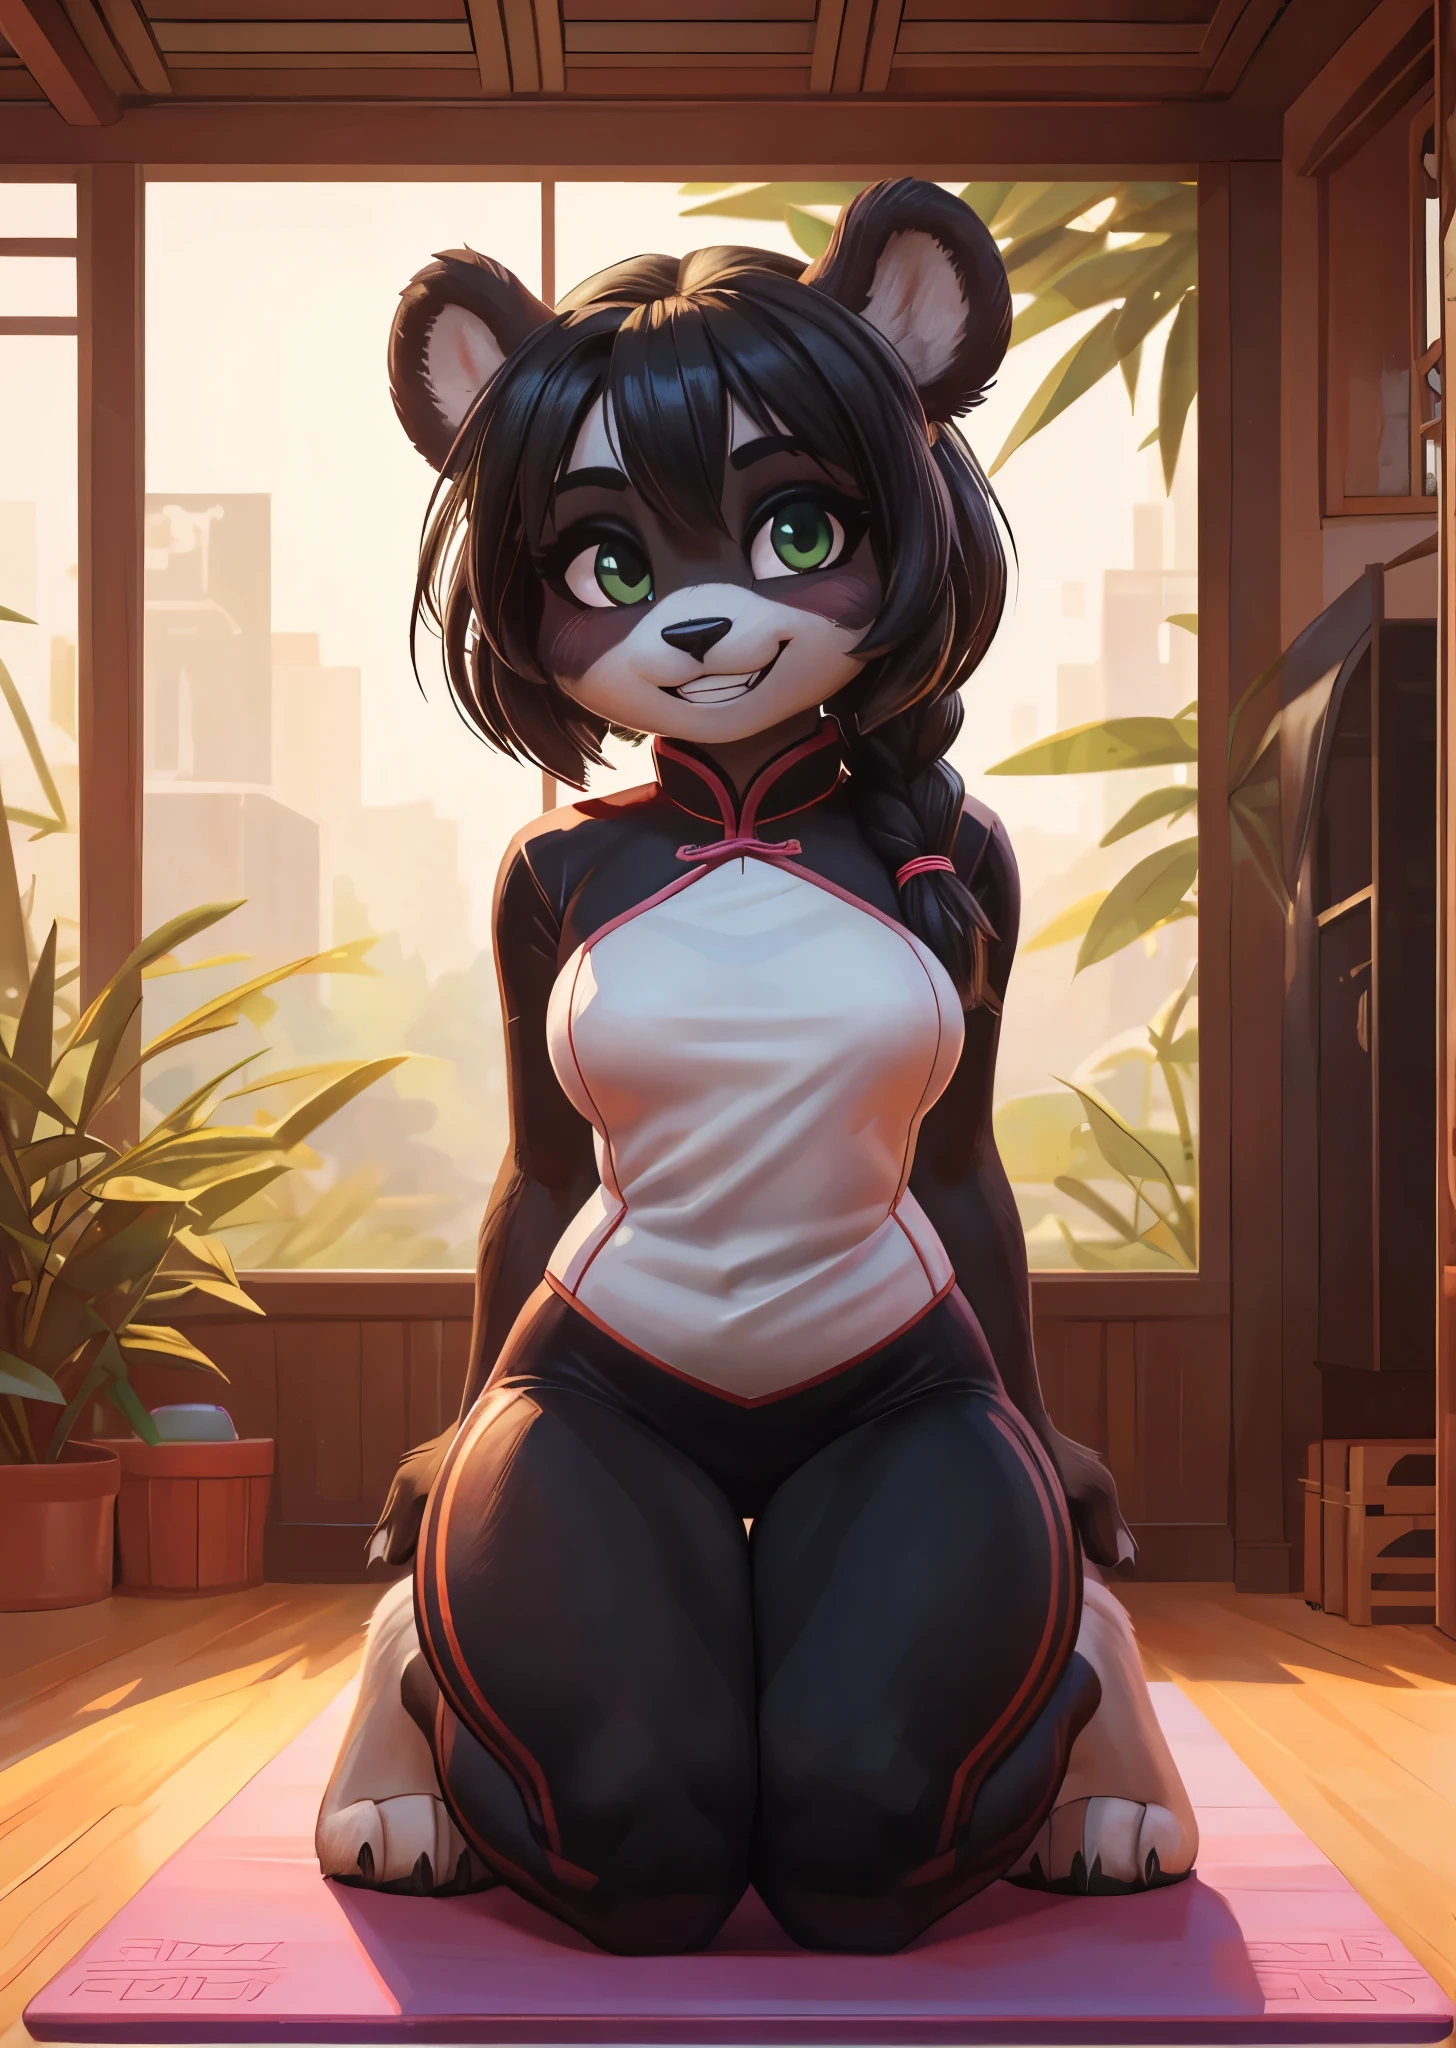 [Yaya Panda], [Uploaded to e621.net; (Pixelsketcher), (wamudraws)], ((masterpiece)), ((HD)), ((solo portrait)), ((full body)), ((front view)), ((feet visible)), ((furry; anthro)), ((detailed fur)), ((detailed shading)), ((beautiful render art)), ((intricate details)), {anthro panda; (black fur), (white fur), black nose, (cute green eyes), (short eyelashes), black hair, braided ponytail, (curvy hips), (beautiful legs), (beautiful paws), (blushing), (cute grin)}, {(chinese clothing), (green shirt), (red yoga pants)}, {(on yoga mat), (kneeling), (looking at viewer)}, [background; (bamboo forest), (living room), (window), (blue sky), (cloudy)]